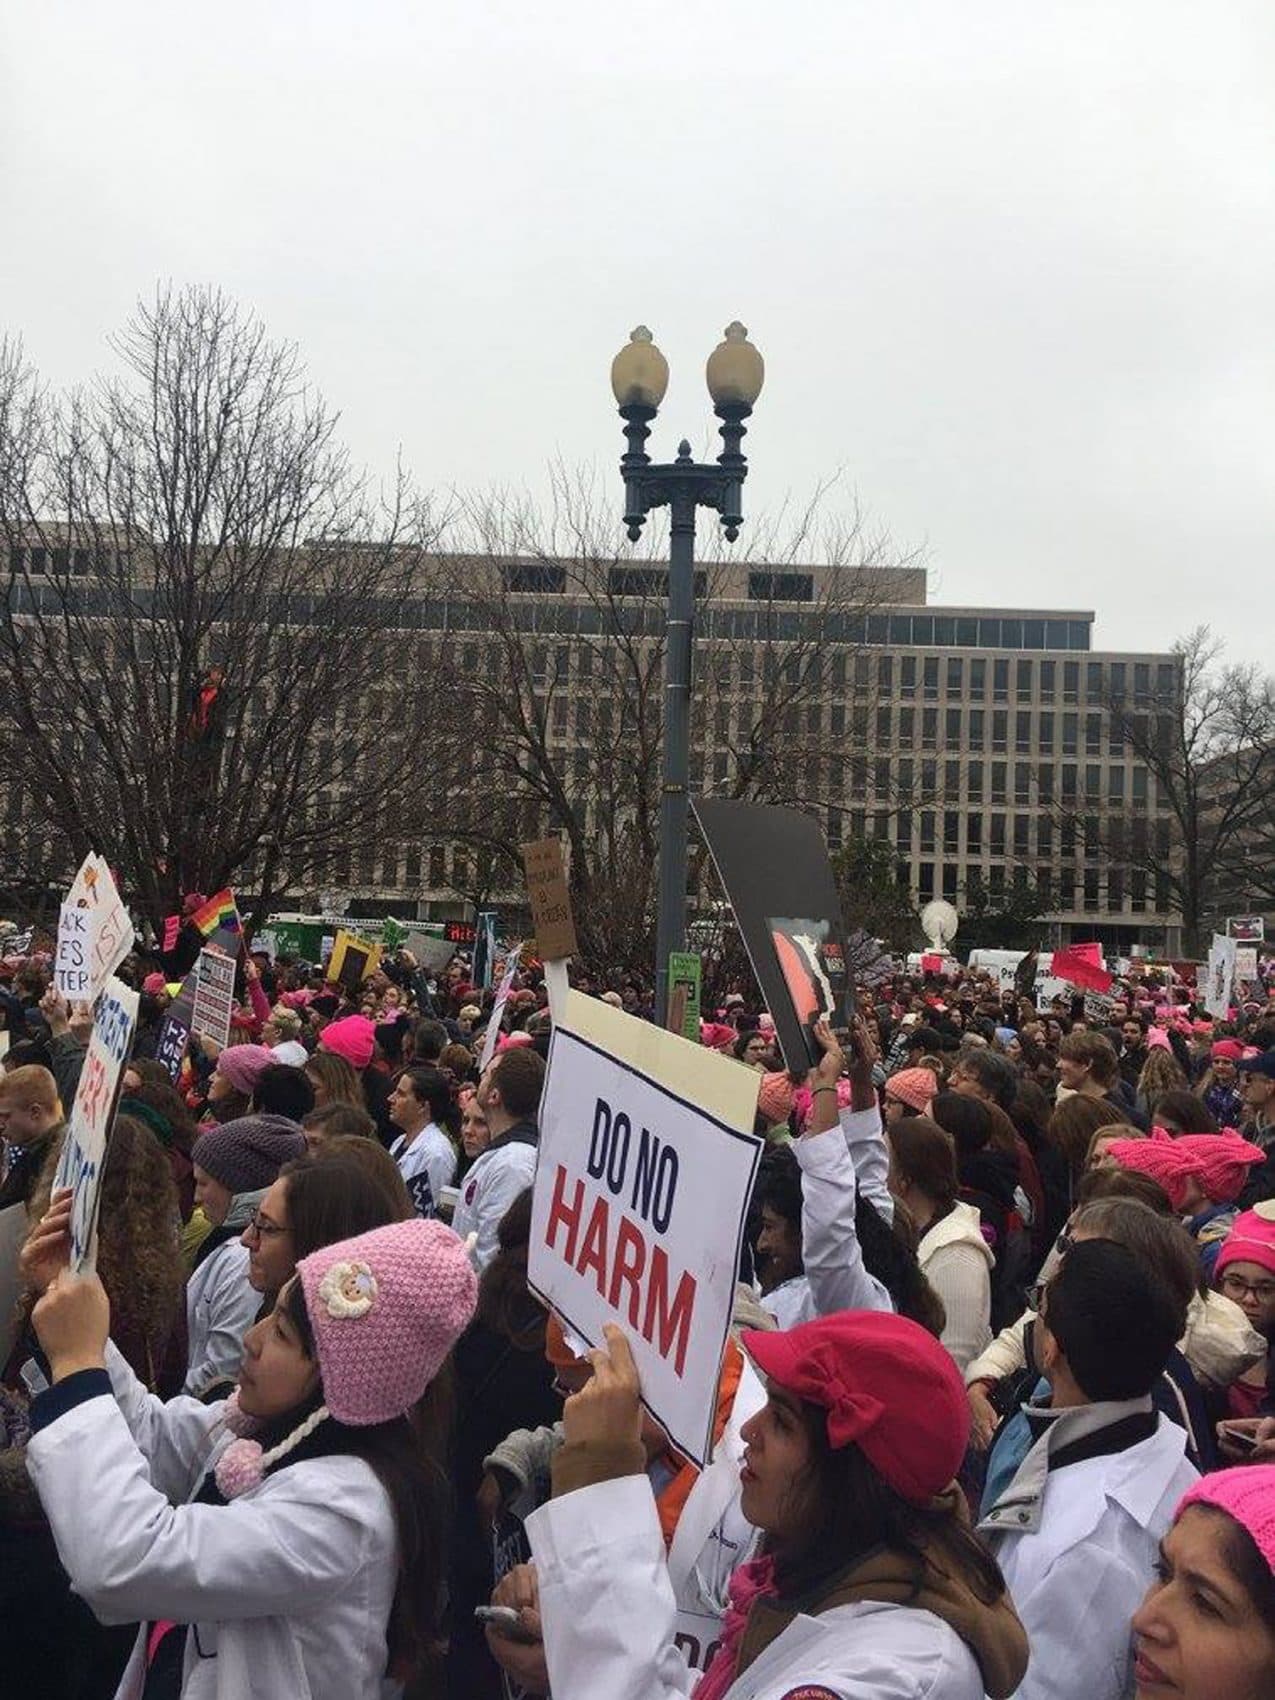 A view of the Women's March on Washington. (Via Lauren Elson) 